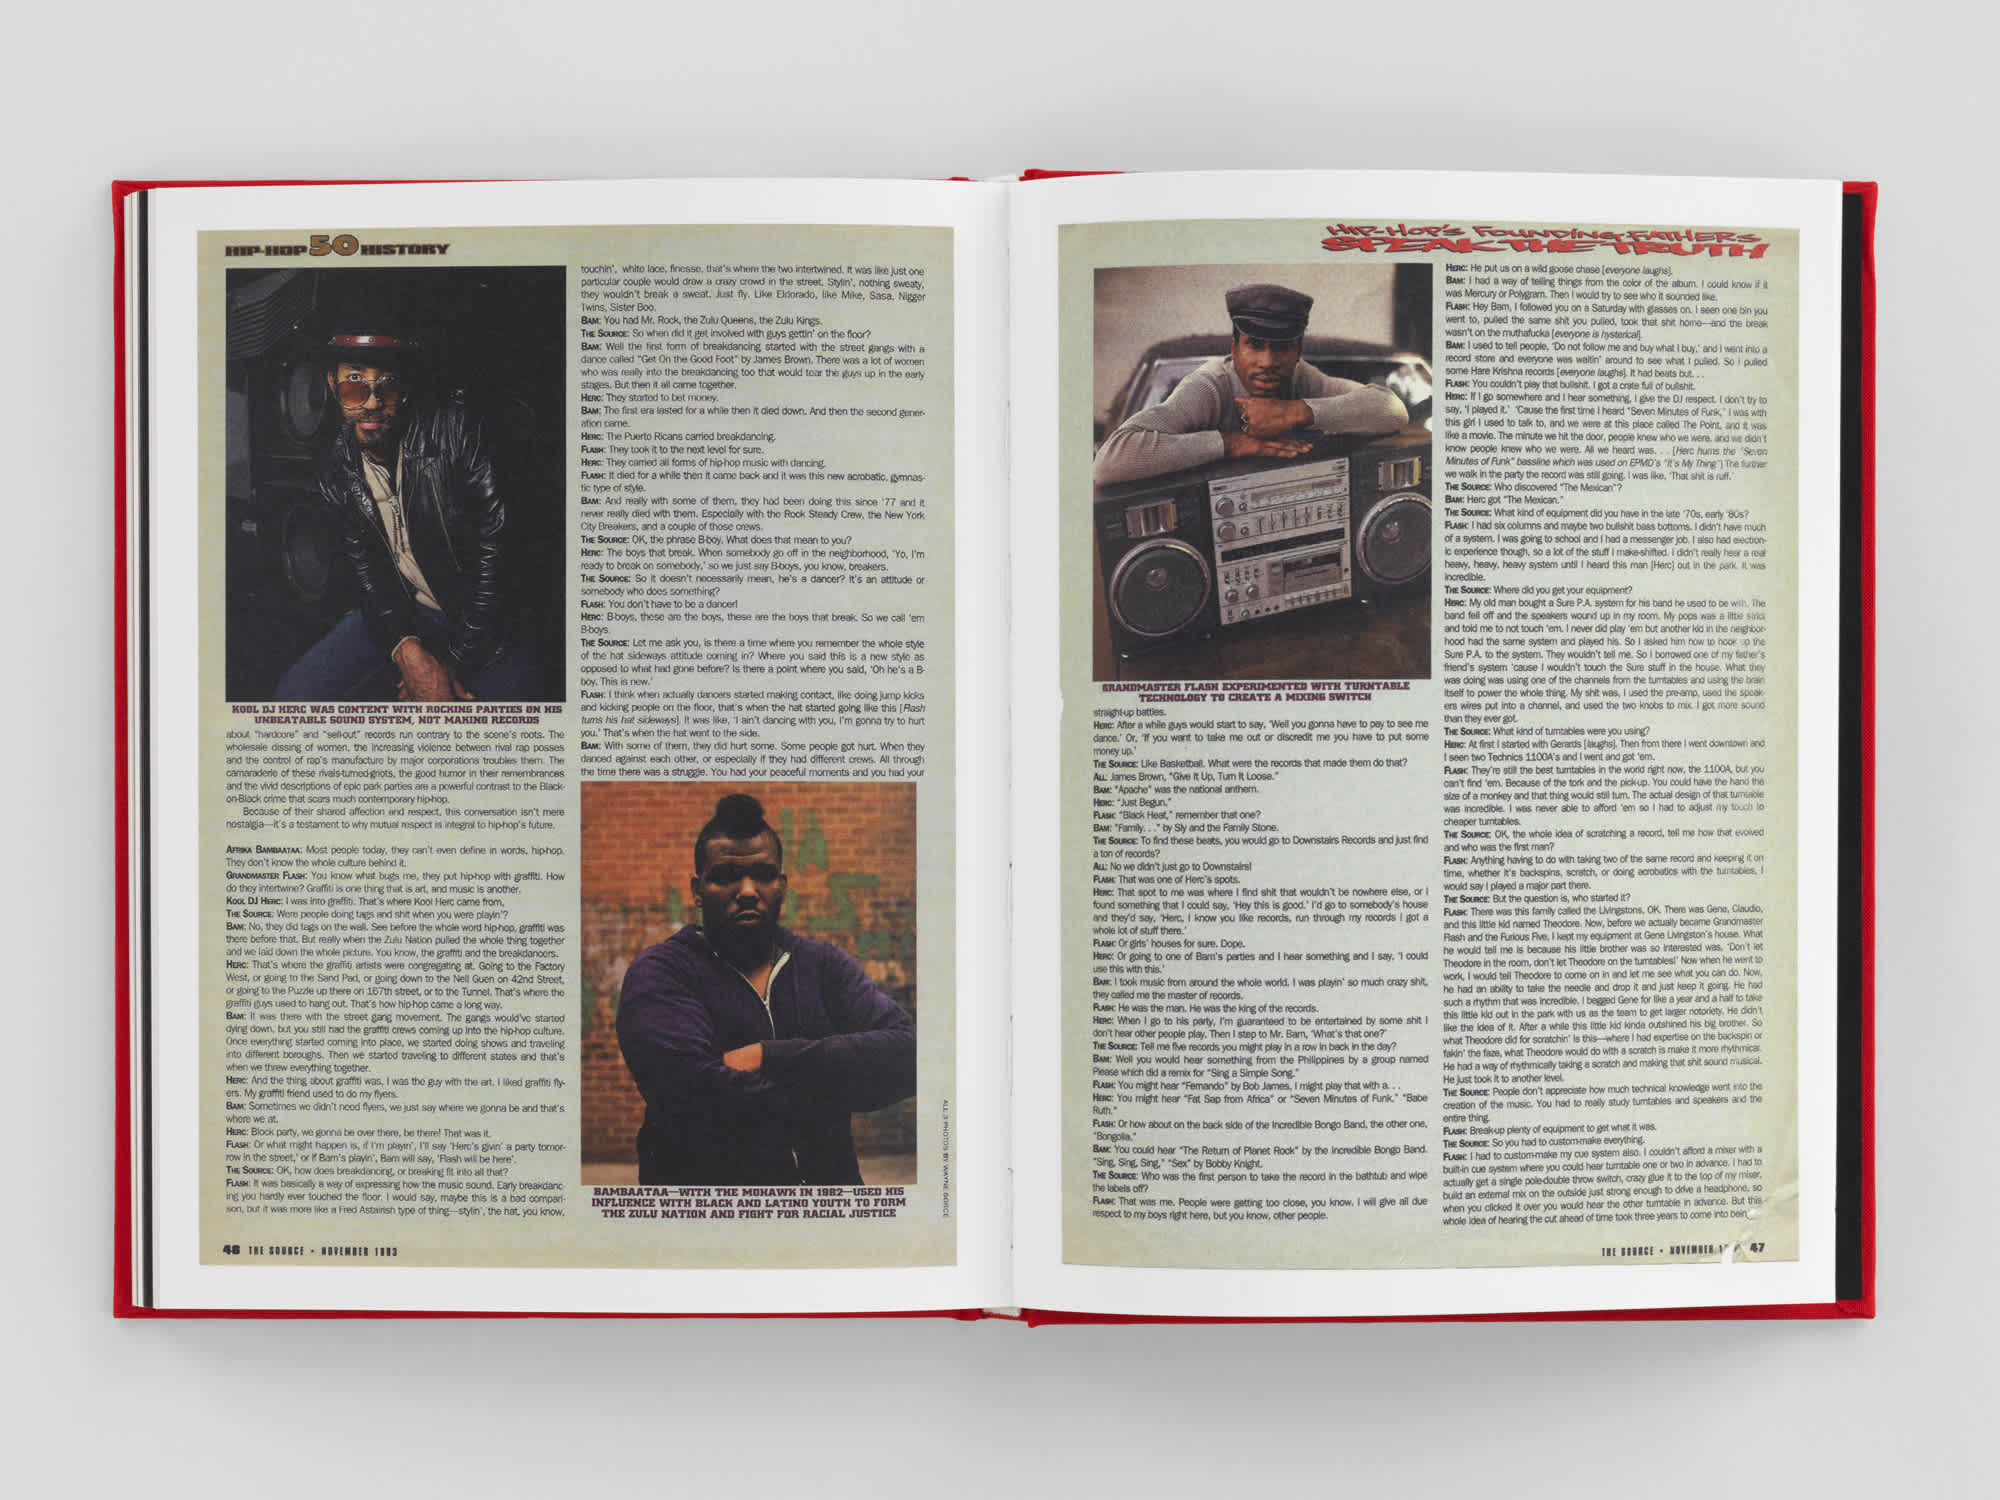 Two page, open book. Left page features two portraits in opposite corners, transcript from in interview fills the other two corners. Right page features on portrait of a man leaning on an 80s boombox in the top left corner. The rest of the page is an interview transcript.